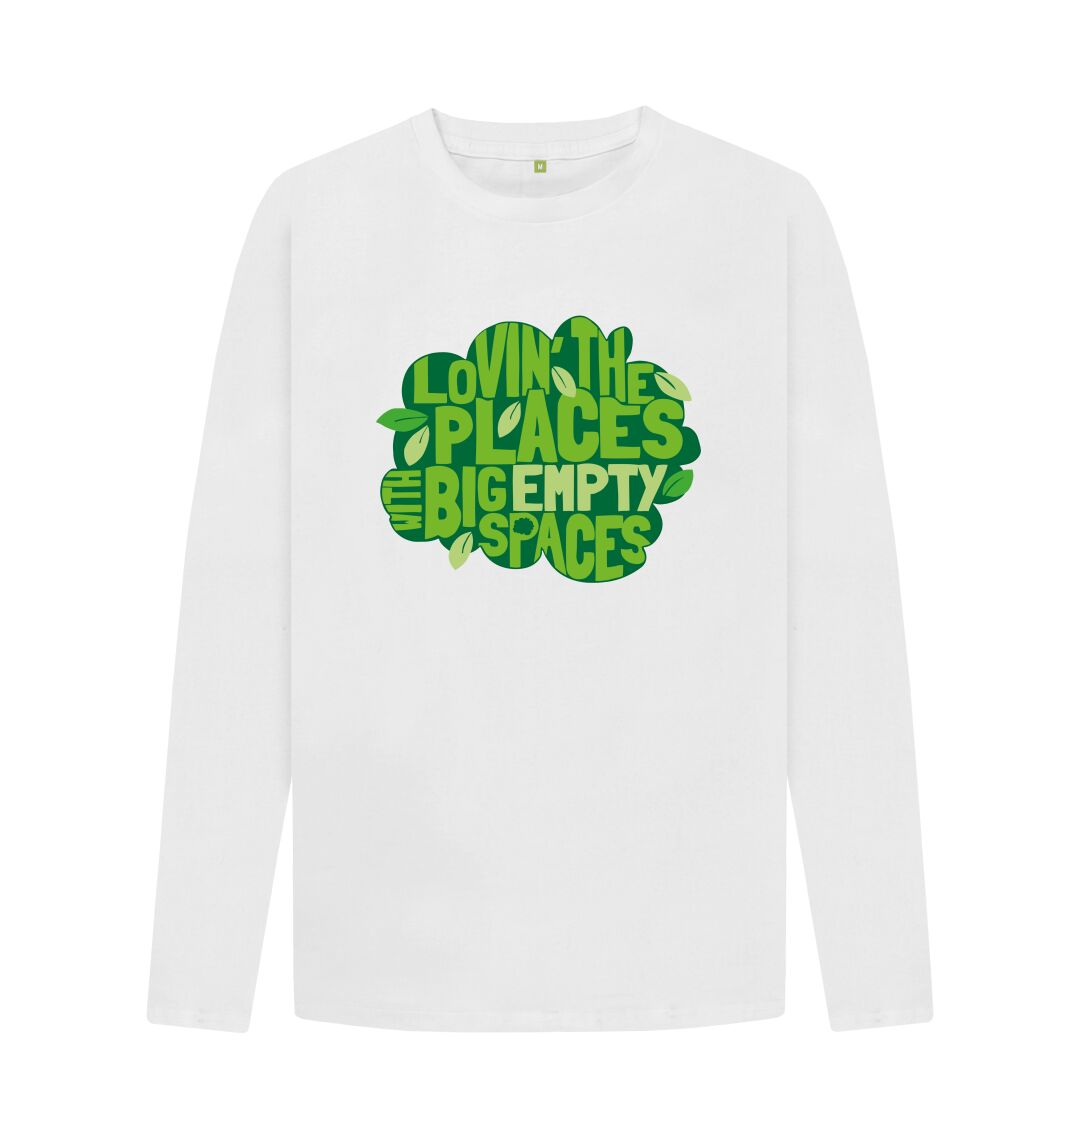 White Men's \/ Unisex Places with Spaces Long Sleeved Tee